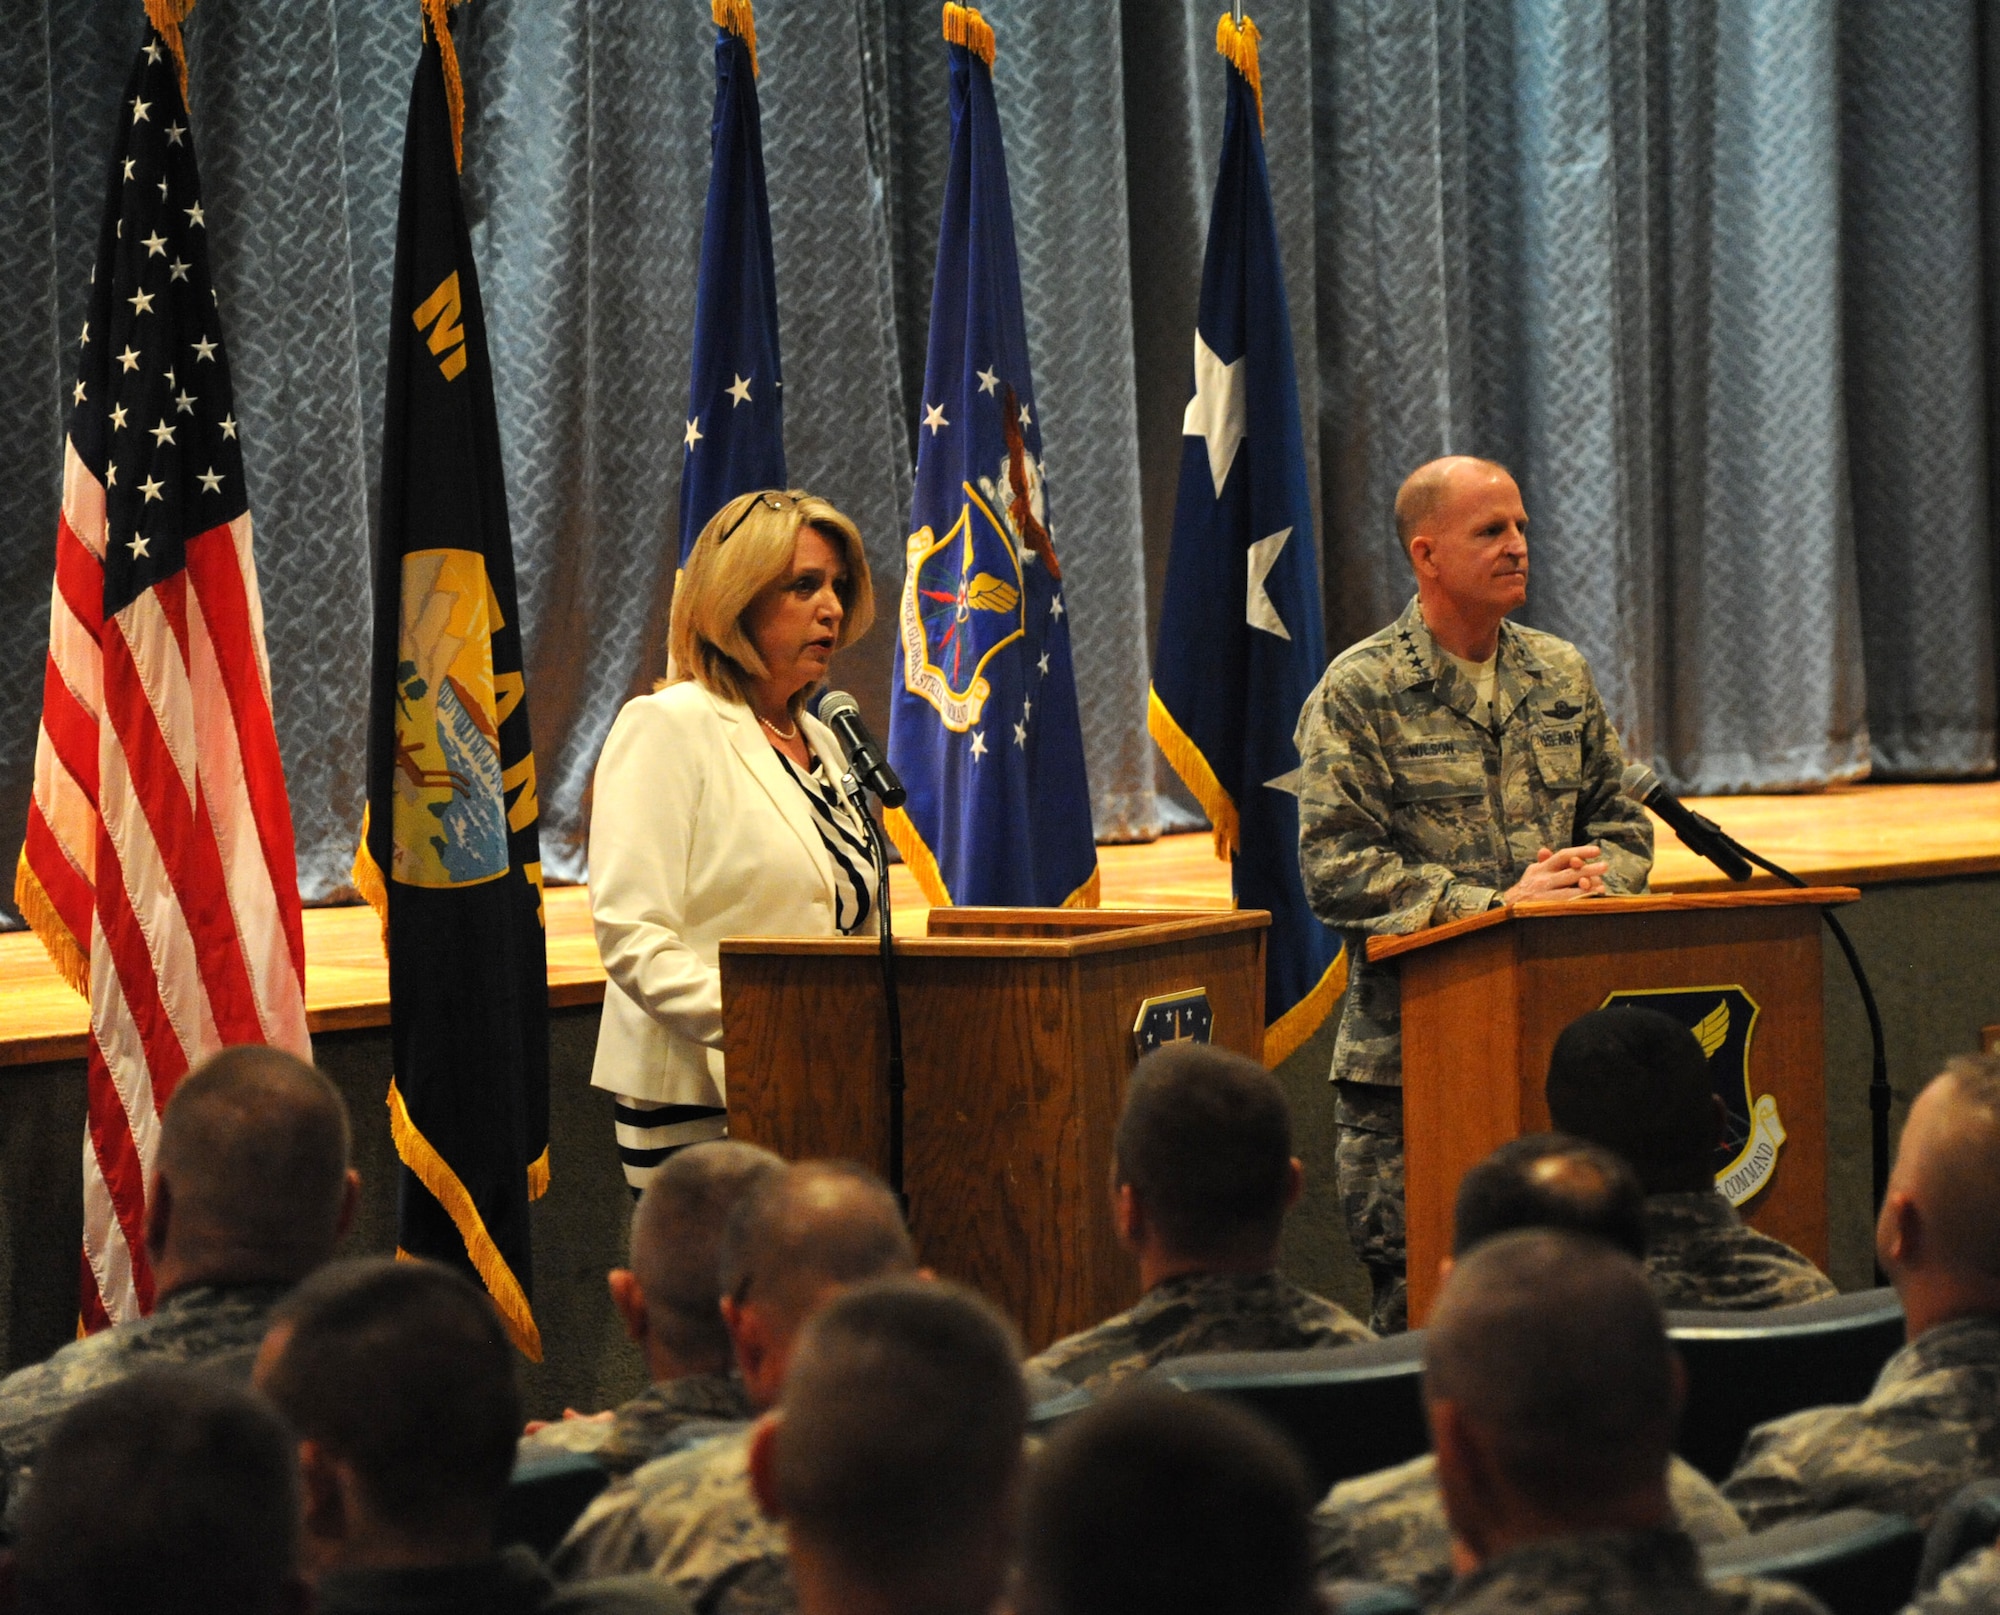 Secretary of the Air Force Deborah Lee James and Lt. Gen. Stephen Wilson, commander of Air Force Global Strike Command, address Airmen of Malmstrom Air Force Base during an all call July 1 at the base auditorium. James and Wilson spoke about Airmen-generated Force Improvement Program initiatives, which are empowering Airmen and creating a culture of continuous improvement. (U.S. Air Force photo/ Airman 1st Class Joshua Smoot)